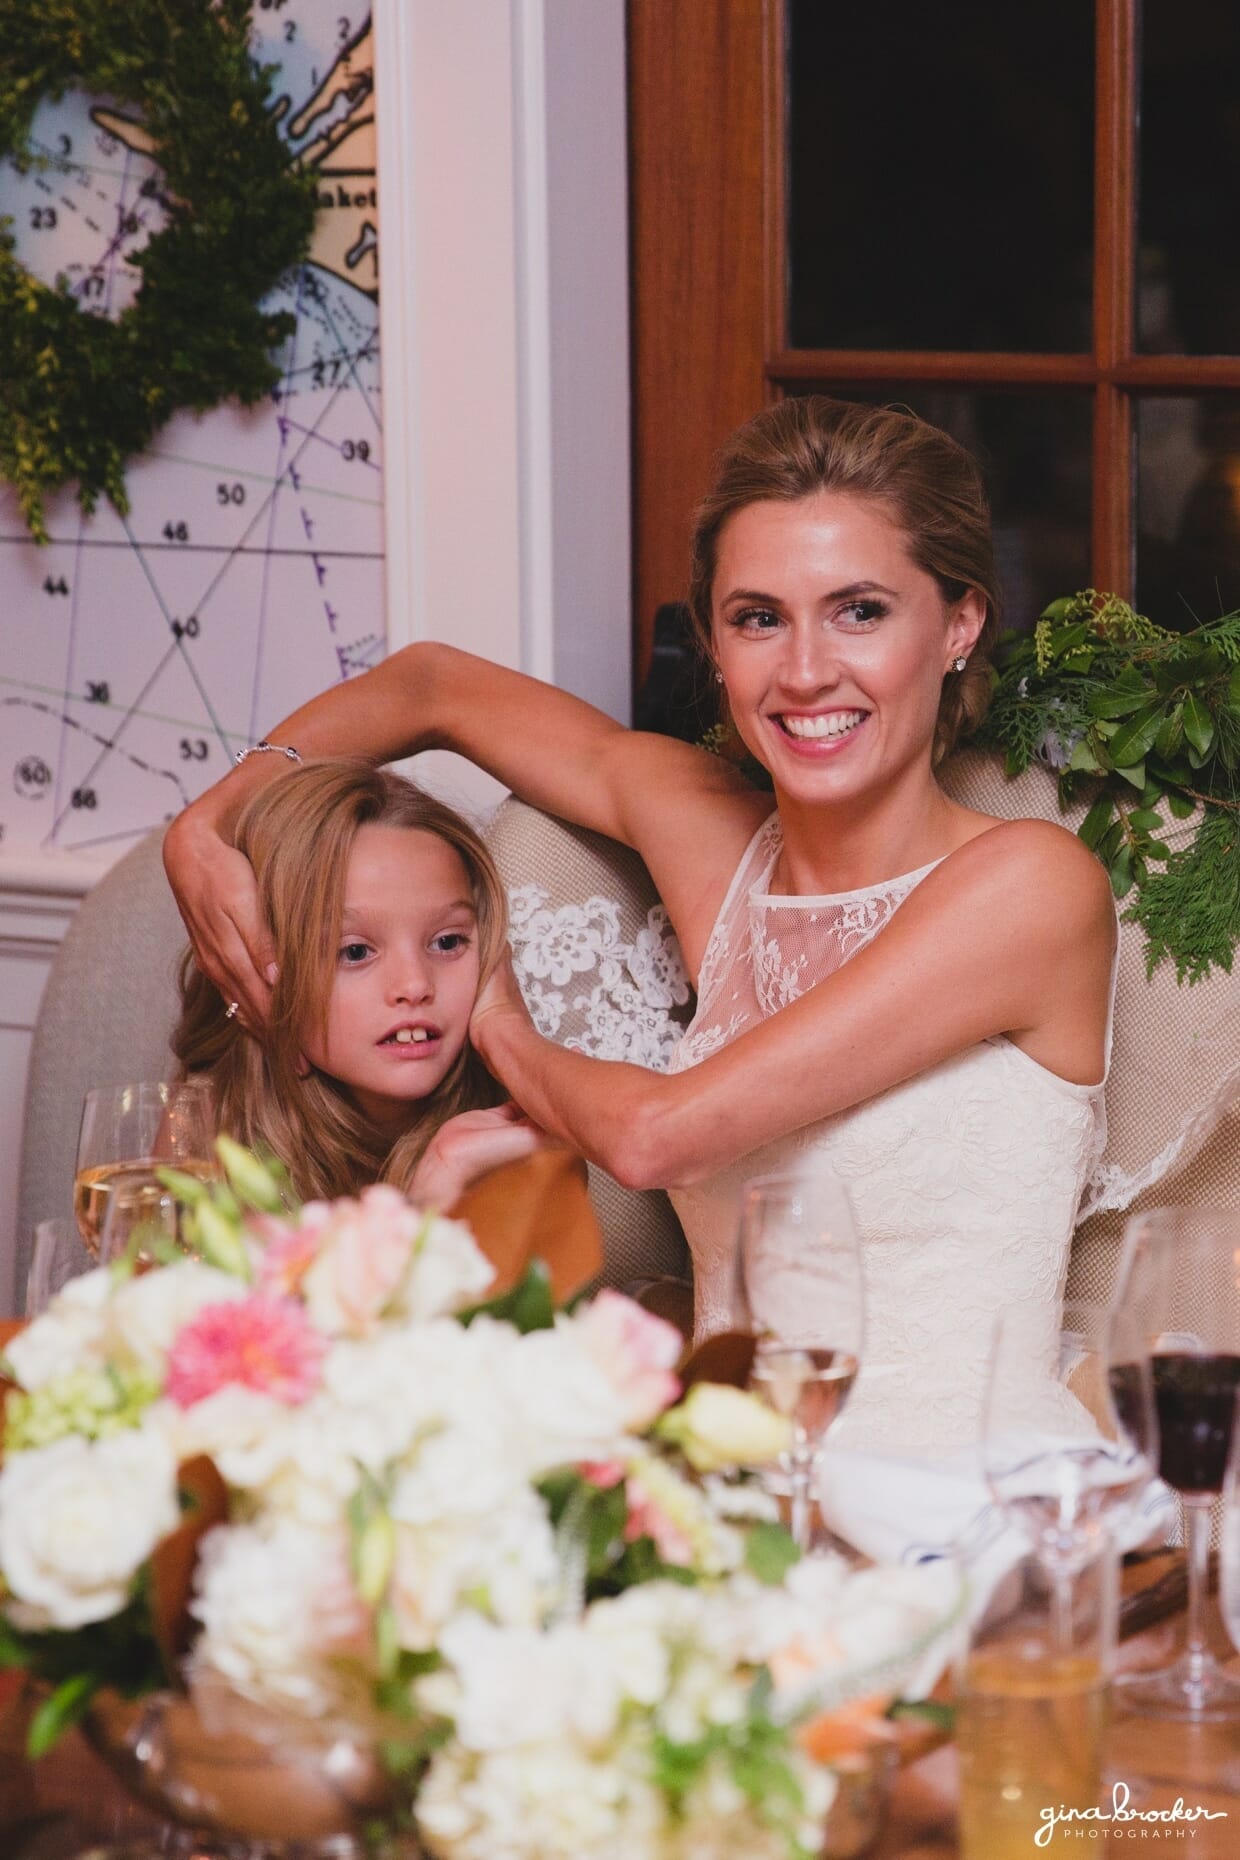 The bride covers the flower girls ears during the wedding toast at the Westmoor Club in Nantucket, Massachusetts